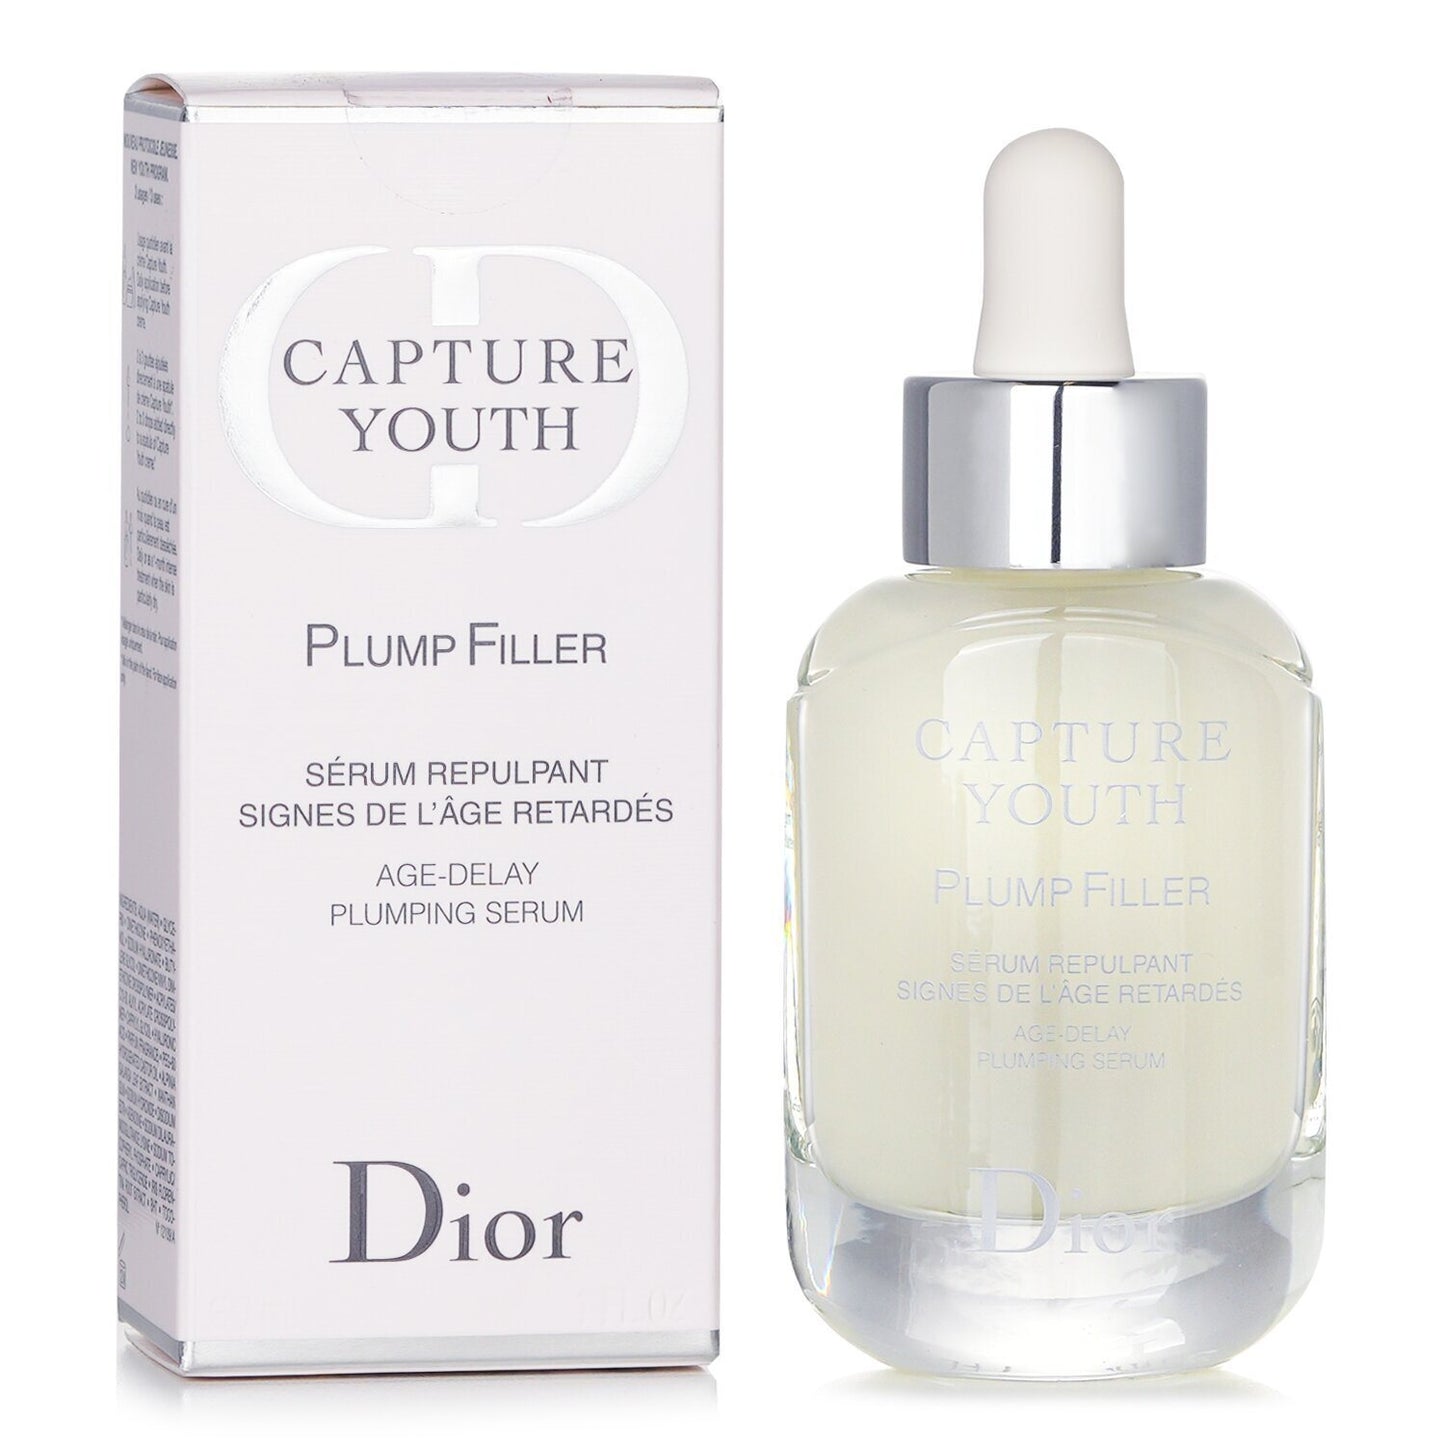 CHRISTIAN DIOR - Capture Youth Plump Filler Age-Delay Plumping Serum 37785/C099600005 30ml/1oz